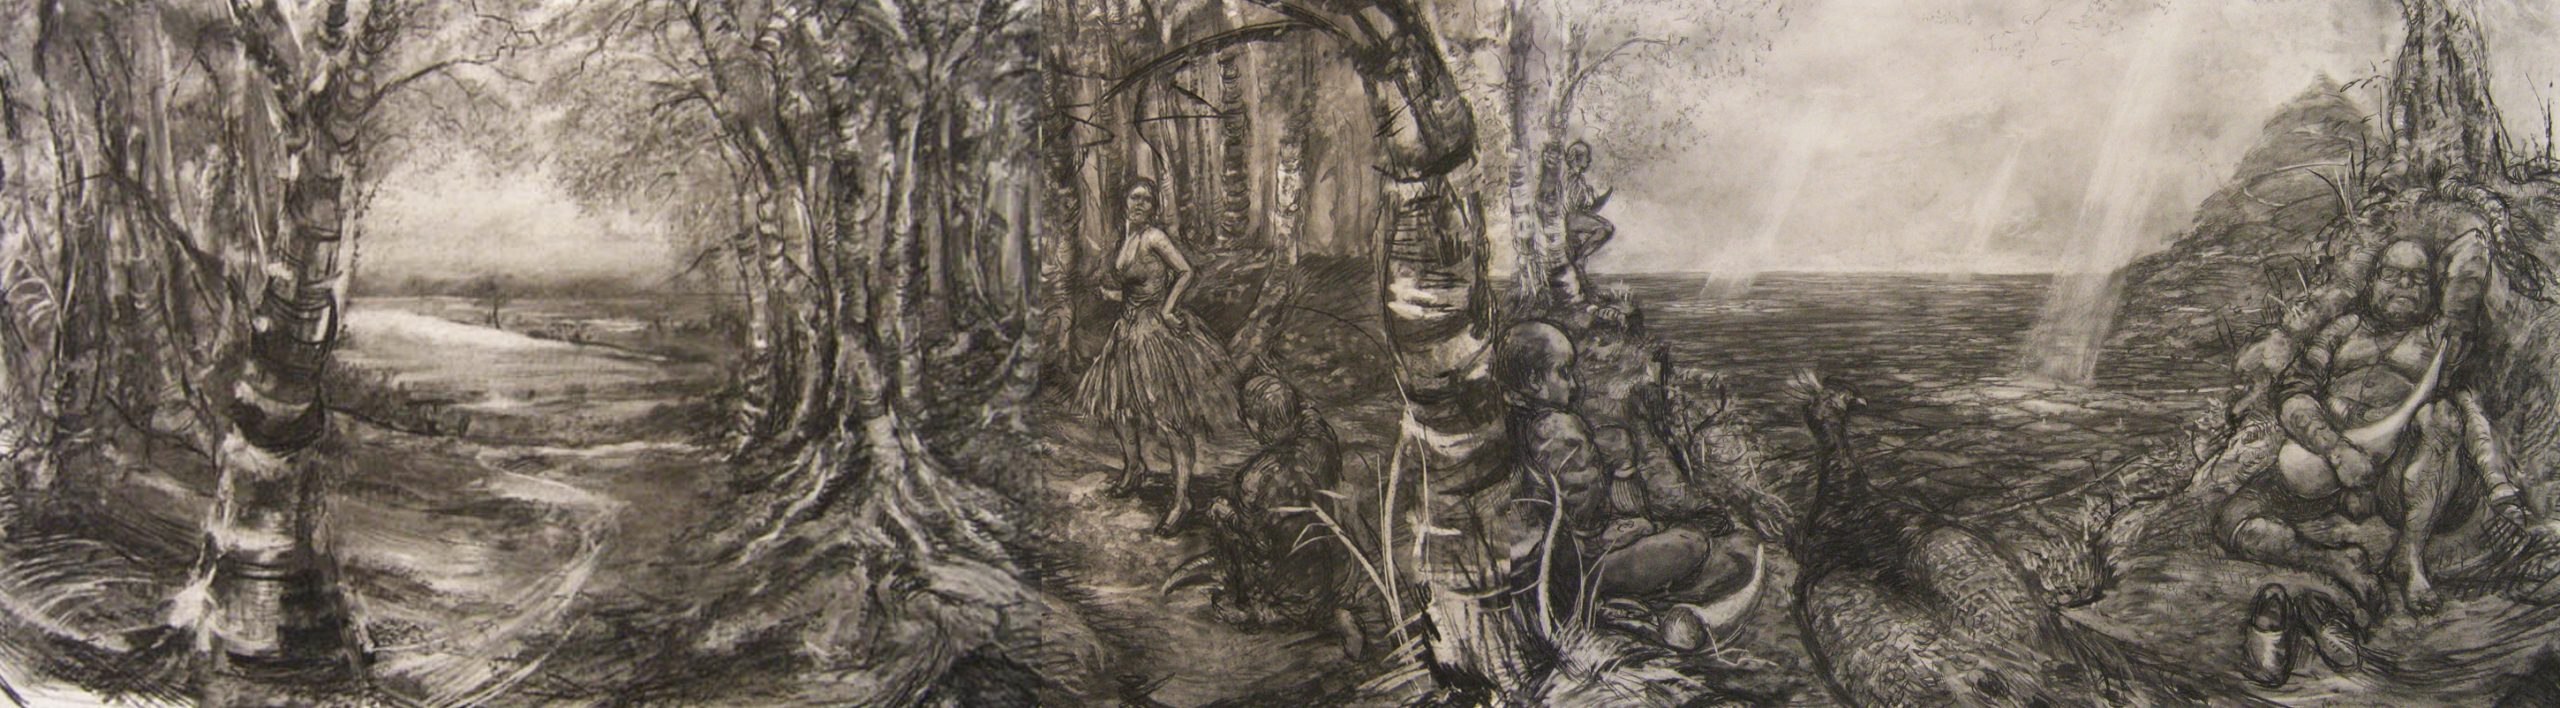 Apotropaic (Don't Fucking Mess With Me Said Little Red Riding Hood), 2005, charcoal on paper, leaves, audio tape, 100 x 340 cm